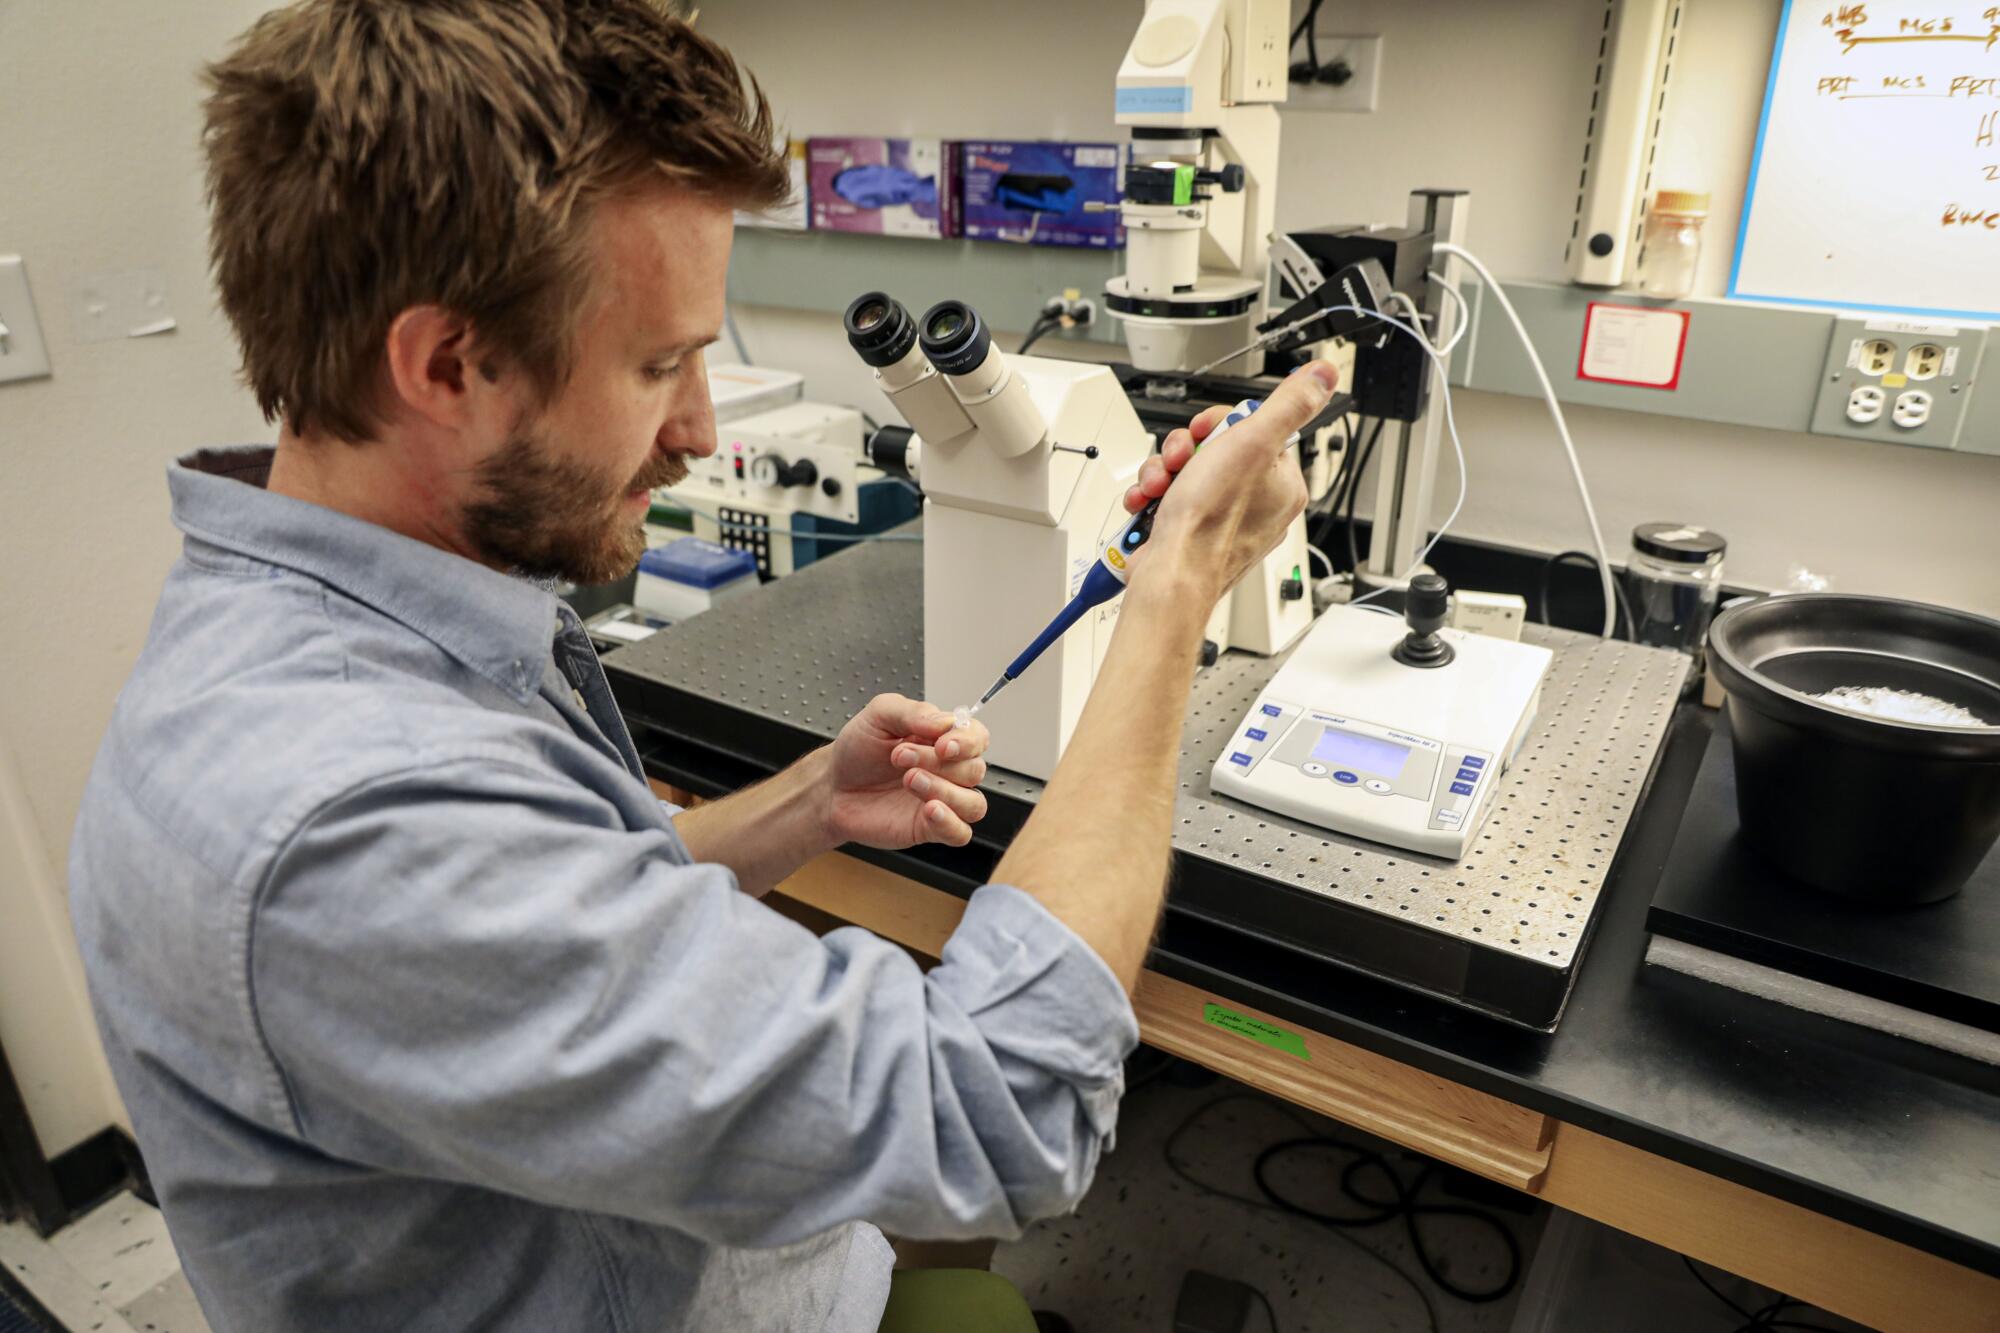 Elliot Jackson, a postdoctoral researcher, works with sea urchin eggs in a lab at Scripps